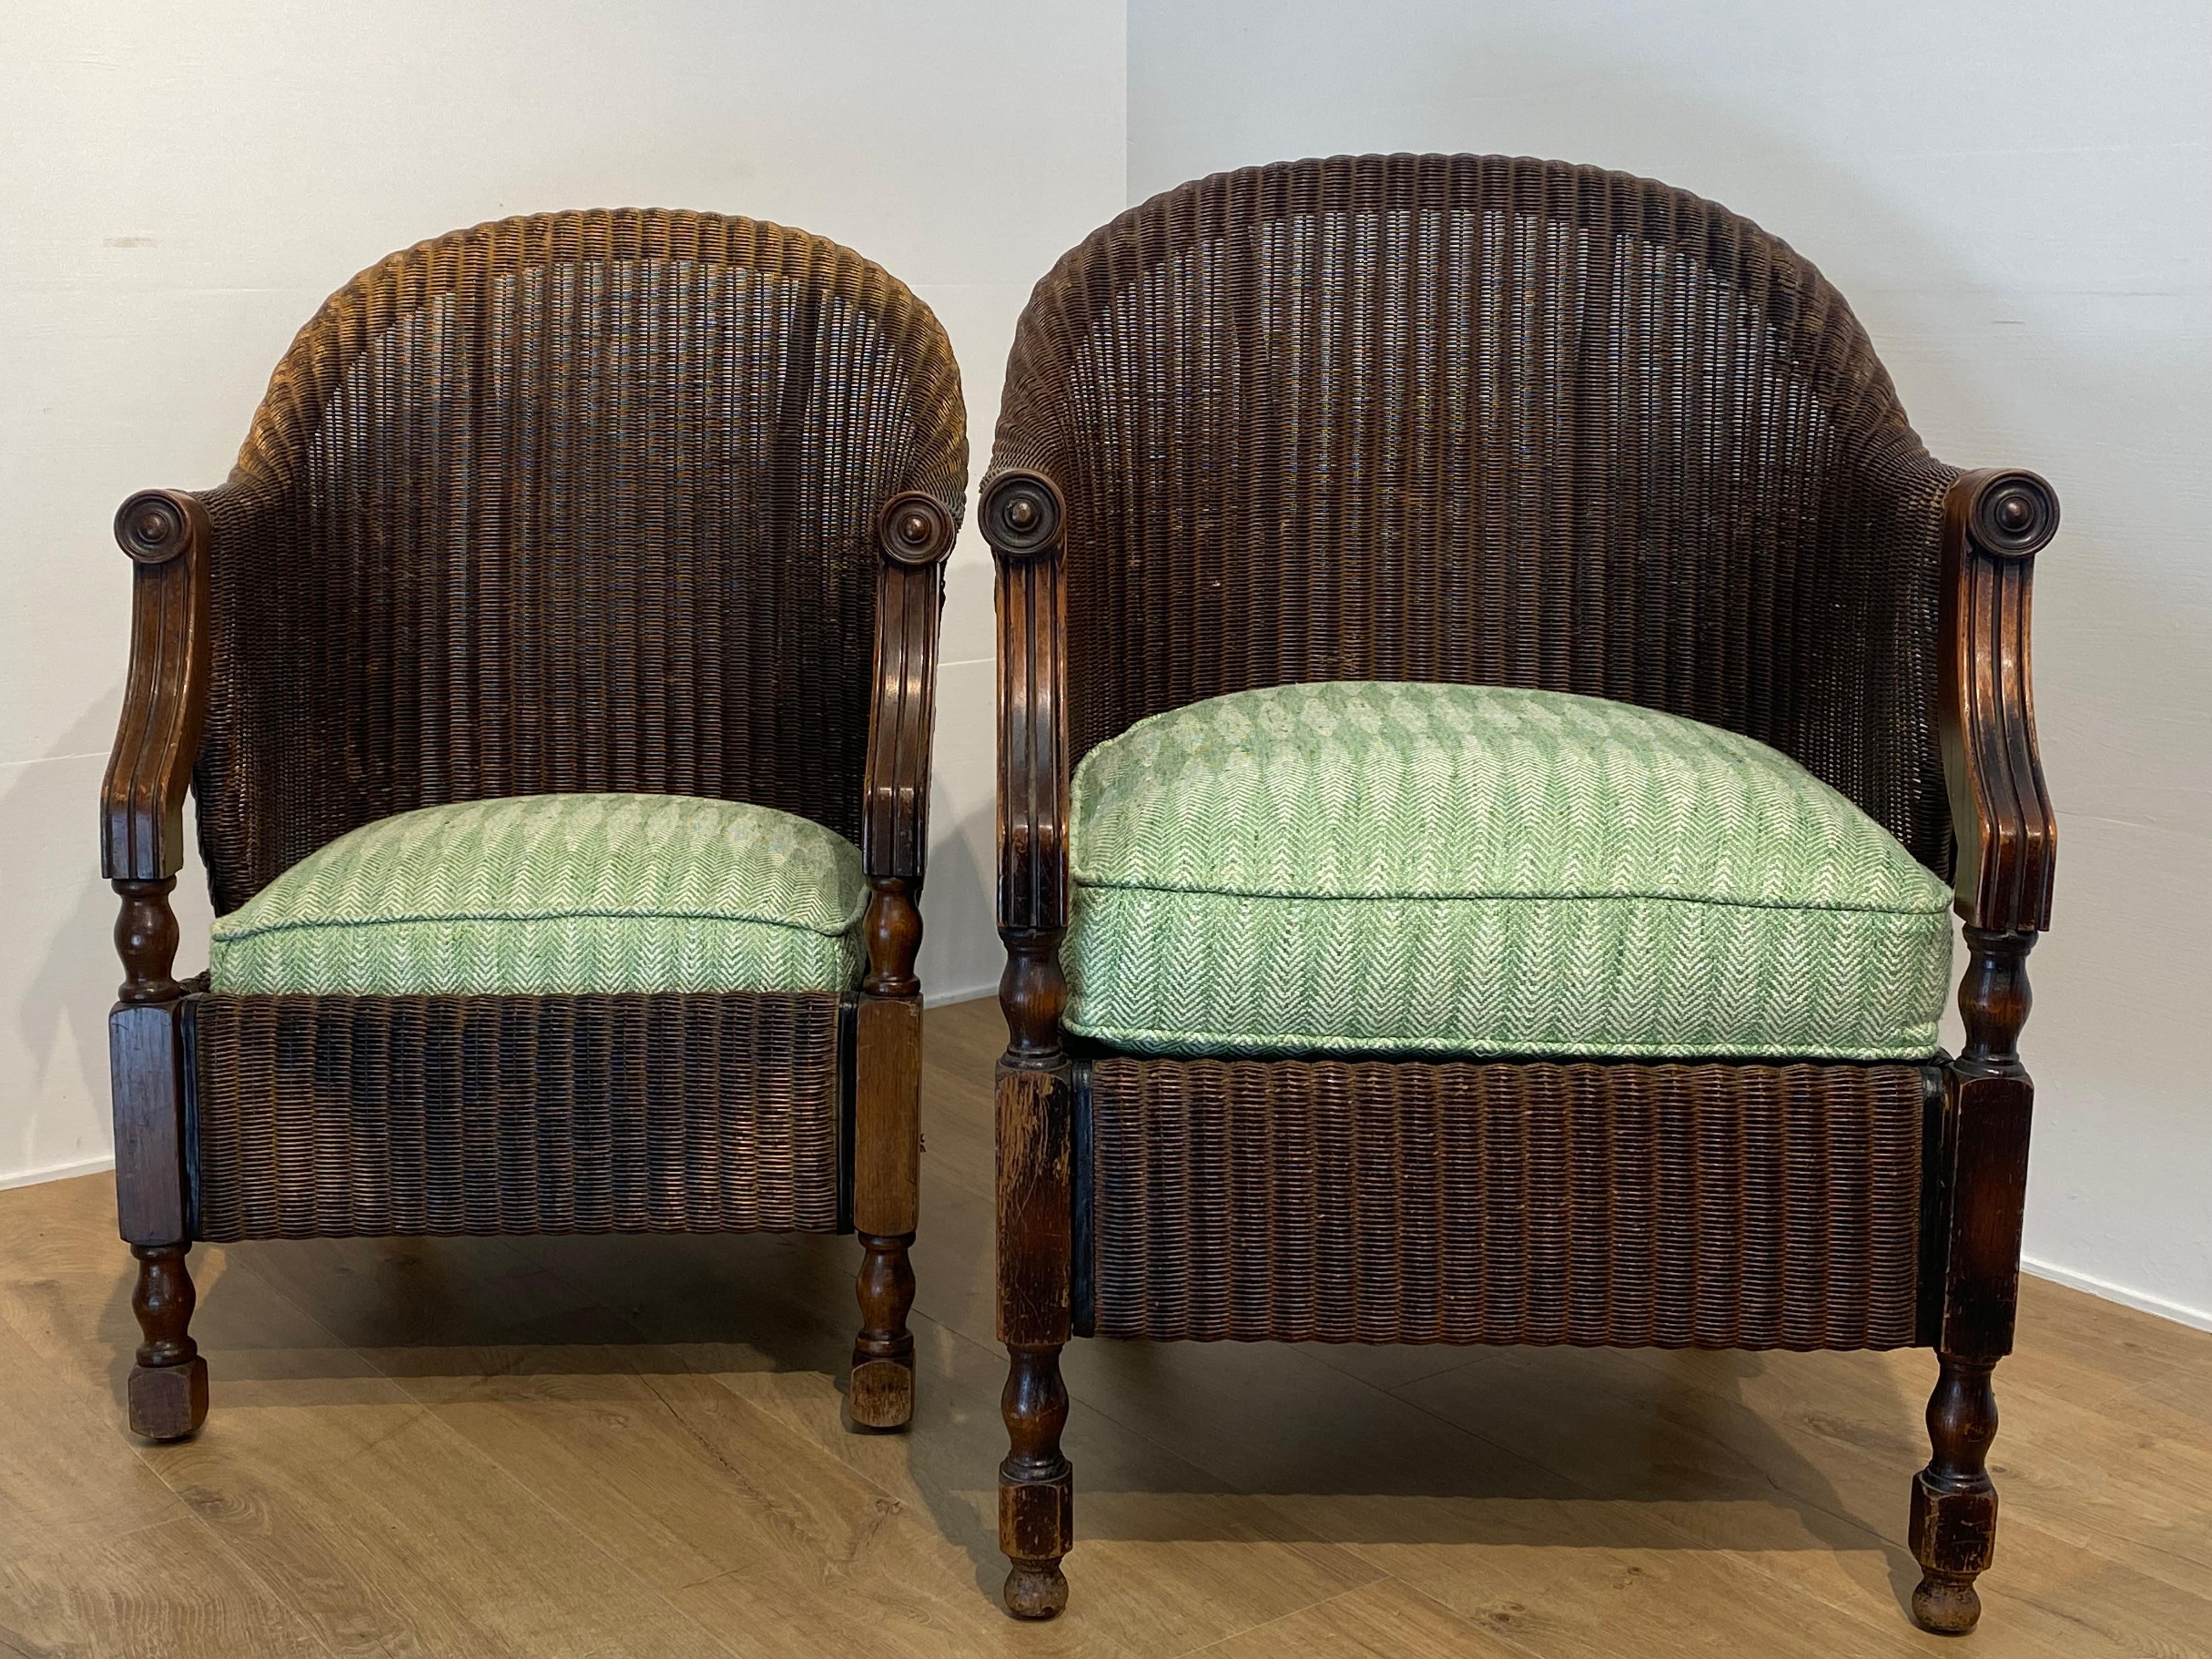 Pair of antique Loyd Loom Chairs In Rattan For Sale 10